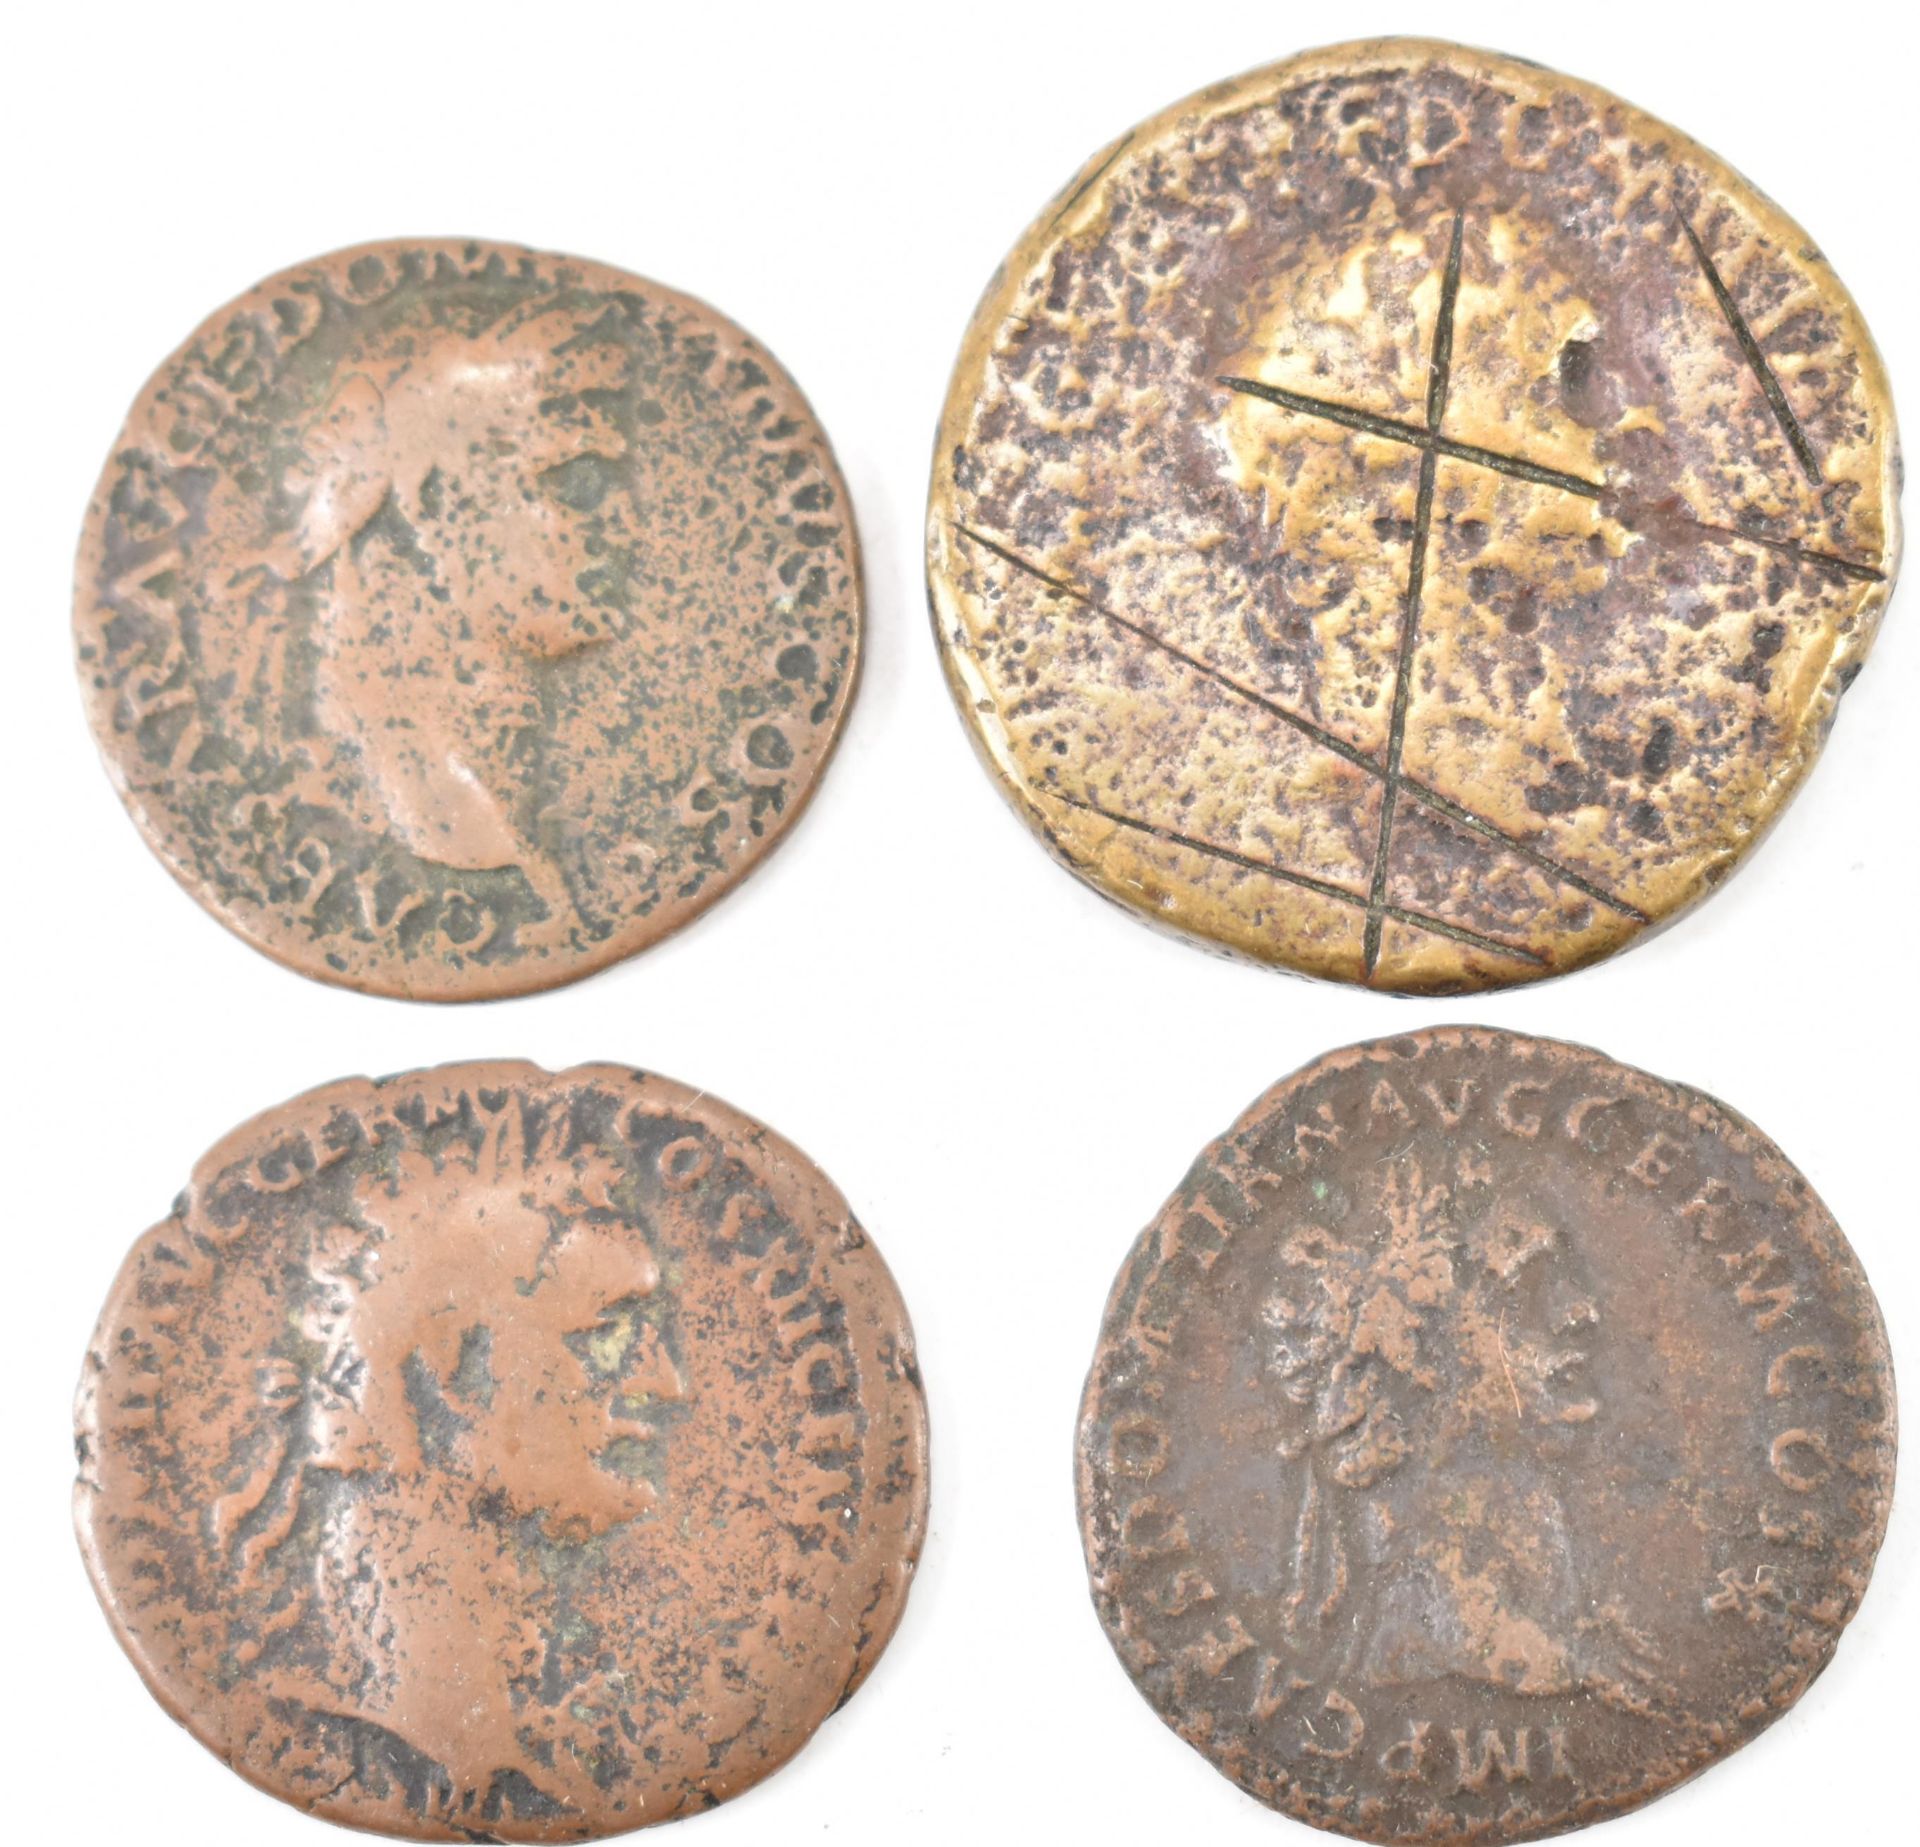 FOUR ROMAN IMPERIAL COINS FROM THE REIGN OF DOMITIAN